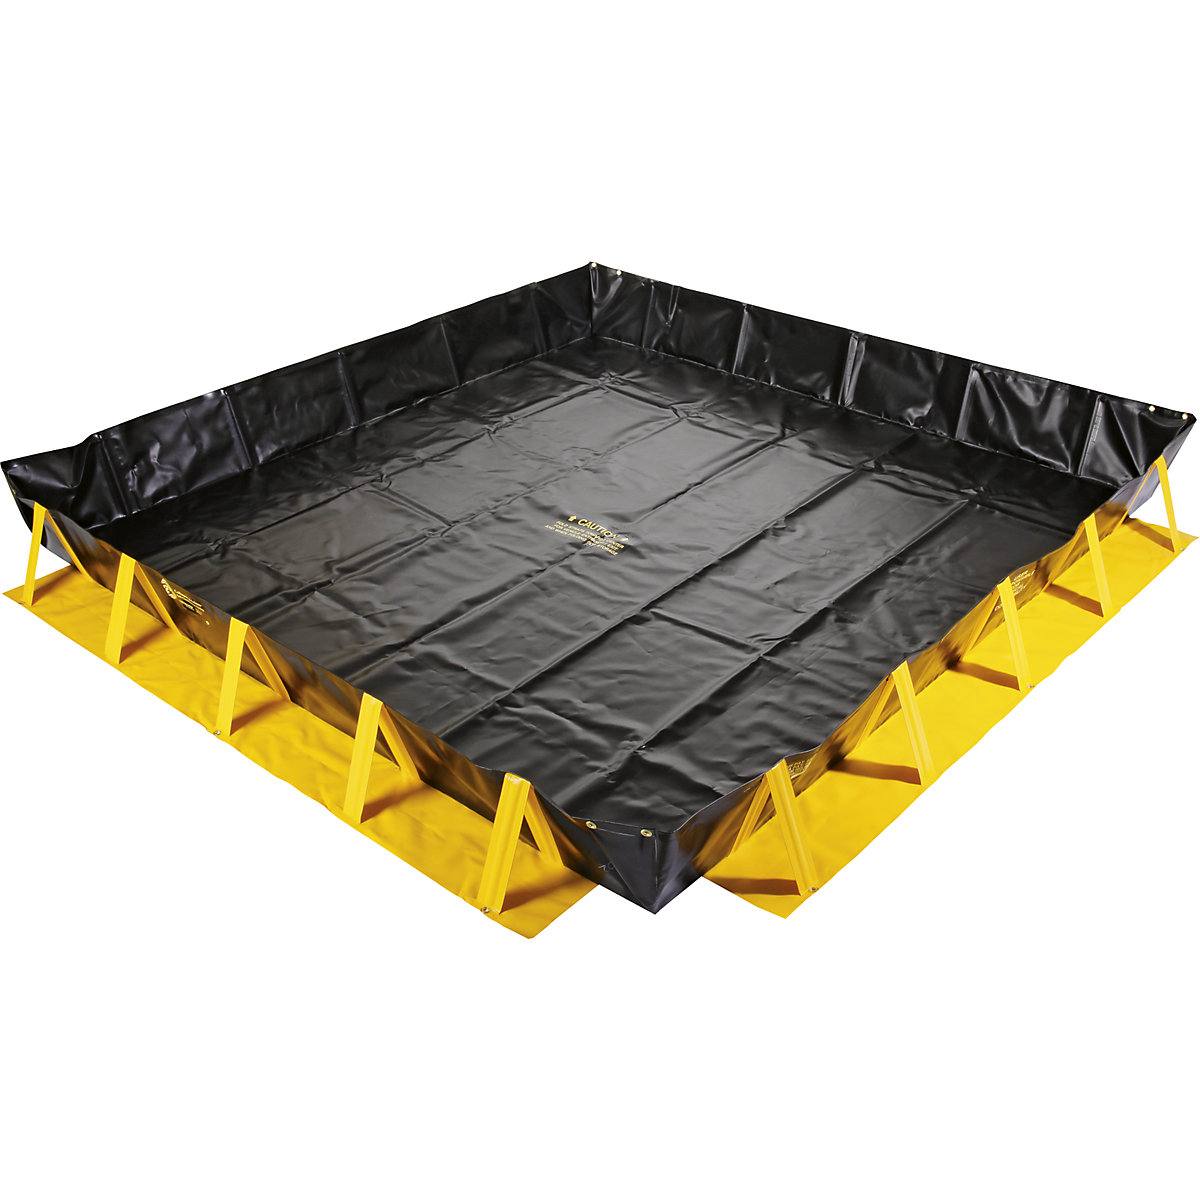 Collapse-A-Tainer® emergency folding tray – PIG, copolymer geomembrane, collection capacity 2831 l-1